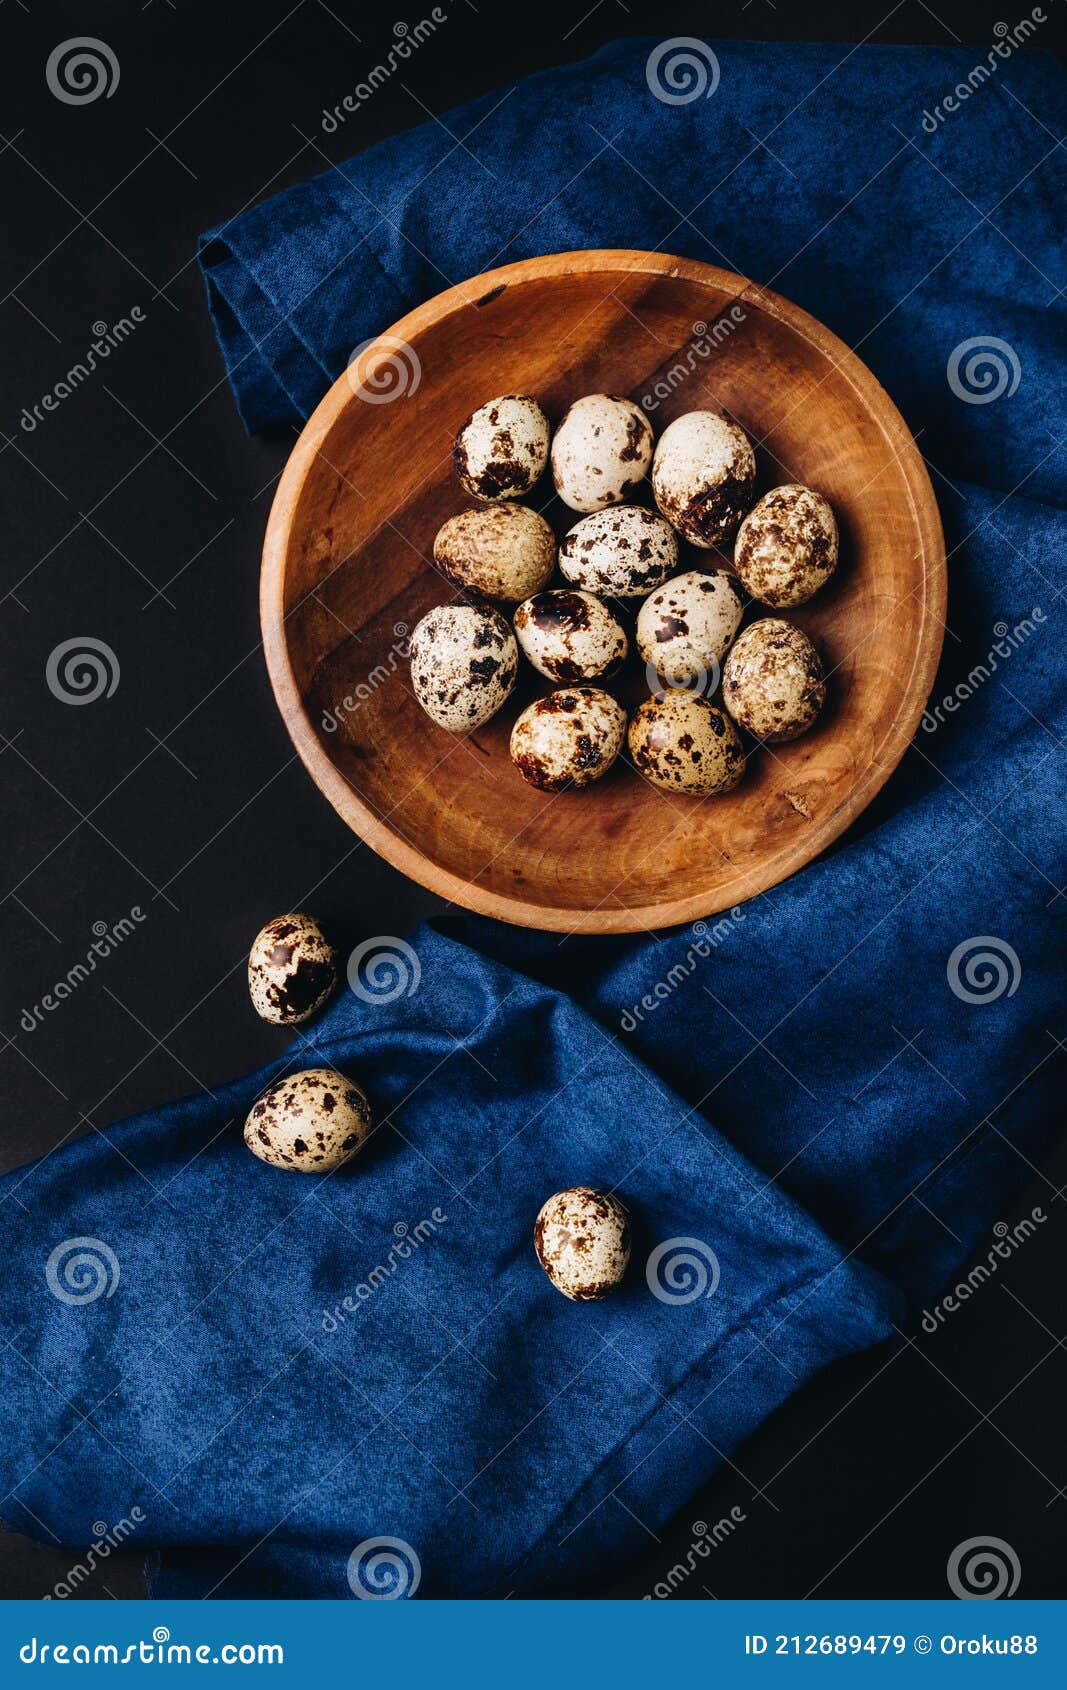 minimal concept of fresh quail eggs in the wooden bowl on the dark background with blue saten or silk around